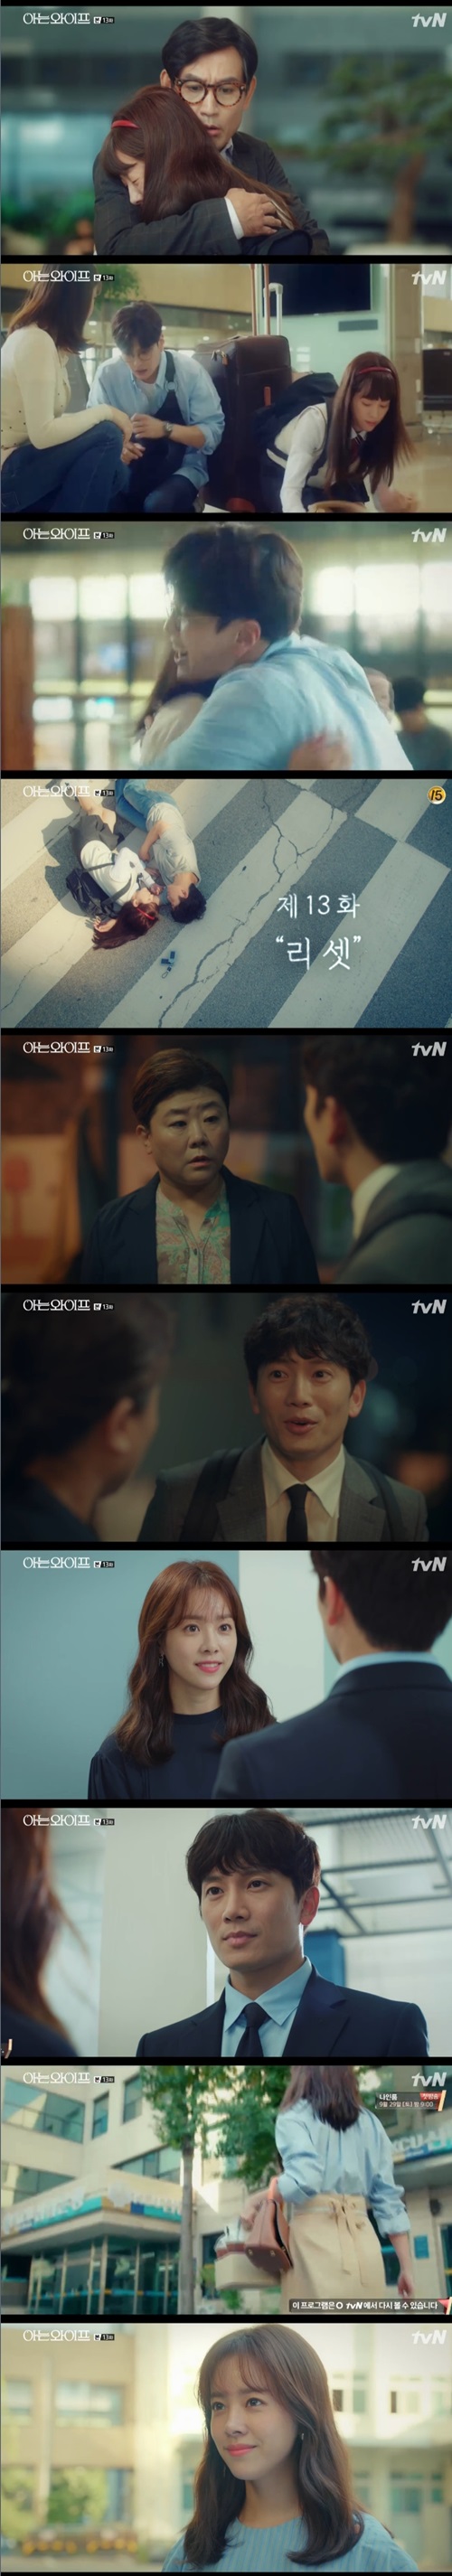 Han Ji-min went straight on the iron wall of Ji Sung without giving up.In the 13th episode of TVNs tree drama Knowing Wife (playplayed by Yang Hee-seung/directed Lee Sang-yeop) broadcast on September 12, Seo Woo Jin (Han Ji-min) came to the point where Cha Ju-hyuk (Ji Sung) works.Cha Ju-hyuk and Seo Woo Jin returned to 2006, and Seo Woo Jin first began to change the past by catching his father who left for a business trip at the airport.Seo Woo Jin tried to save his father and at that airport, Seo Woo Jin encountered Yoon Jong-hoo (played by Jang Seung-jo).Yoon Jong-hoo was holding on to his lover who was about to leave, and Seo Woo Jin helped to drop the womans bag.Seo Woo Jin, who saved his father and kept the love of Yoon Jong-hoo, went out to find Cha Ju-hyuk.However, Cha Ju-hyuk hid from Seo Woo Jin, saying, I only need to pass it safely today.Seo Woo Jin went to Cha Ju-hyuks trail, but Cha Ju-hyuk ran away saying, I can not make anyone happy, you live your life.Seo Woo Jin nearly got hit by a motorcycle while chasing such a Cha Ju-hyuk, and the moment Cha Ju-hyuk jumped in front of the motorcycle to save Seo Woo Jin, the two returned to the present.Seo Woo Jins mother (Lee Jung-eun) was a queen of healthy sales, not dementia patients, and her father died three years ago.Seo Woo Jin was about to go to the Gahyeon point where Cha Ju-hyuk worked, but Cha Ju-hyuk was on leave for two months.Yoon Jong-hoo was again a twin father, while Oh Sang-sik (Oh Ui-sik) and Cha Ju-eun (Park Hee-bong) operated a food truck, not a restaurant.Cha Ju-hyuk was living a wanderer-like life, traveling when he could, without dating or marriage.Cha Ju-hyuk returned only after being told that his place had not yet been filled in, confirming that Sea Woo Jin was still at the head office.In the meantime, Cha Ju-hyuk met a homeless man who rode Taxi and then became a Taxi driver.He said he was a well-known urologist in the past, went to the past to reverse medical accidents, and his life was plummeting because he was greedy for money.When Cha Ju-hyuk asked, Why was it me? the Taxi driver said, It seemed so desperate, a errandman between God and man.Cha Ju-hyuk went to the house of Seo Woo Jin, changed the lights secretly, and encountered his mother Seo Woo Jin, but he was not a dementia patient. He did not recognize Cha Ju-hyuk and sold various cosmetics and frying pans.Cha Ju-hyuk then went to the head office to return to work and met with Seo Woo Jin, and Seo Woo Jin declared that he did not give up yet.Seo Woo Jin applied for a branch move.Yoo Gyeong-sang